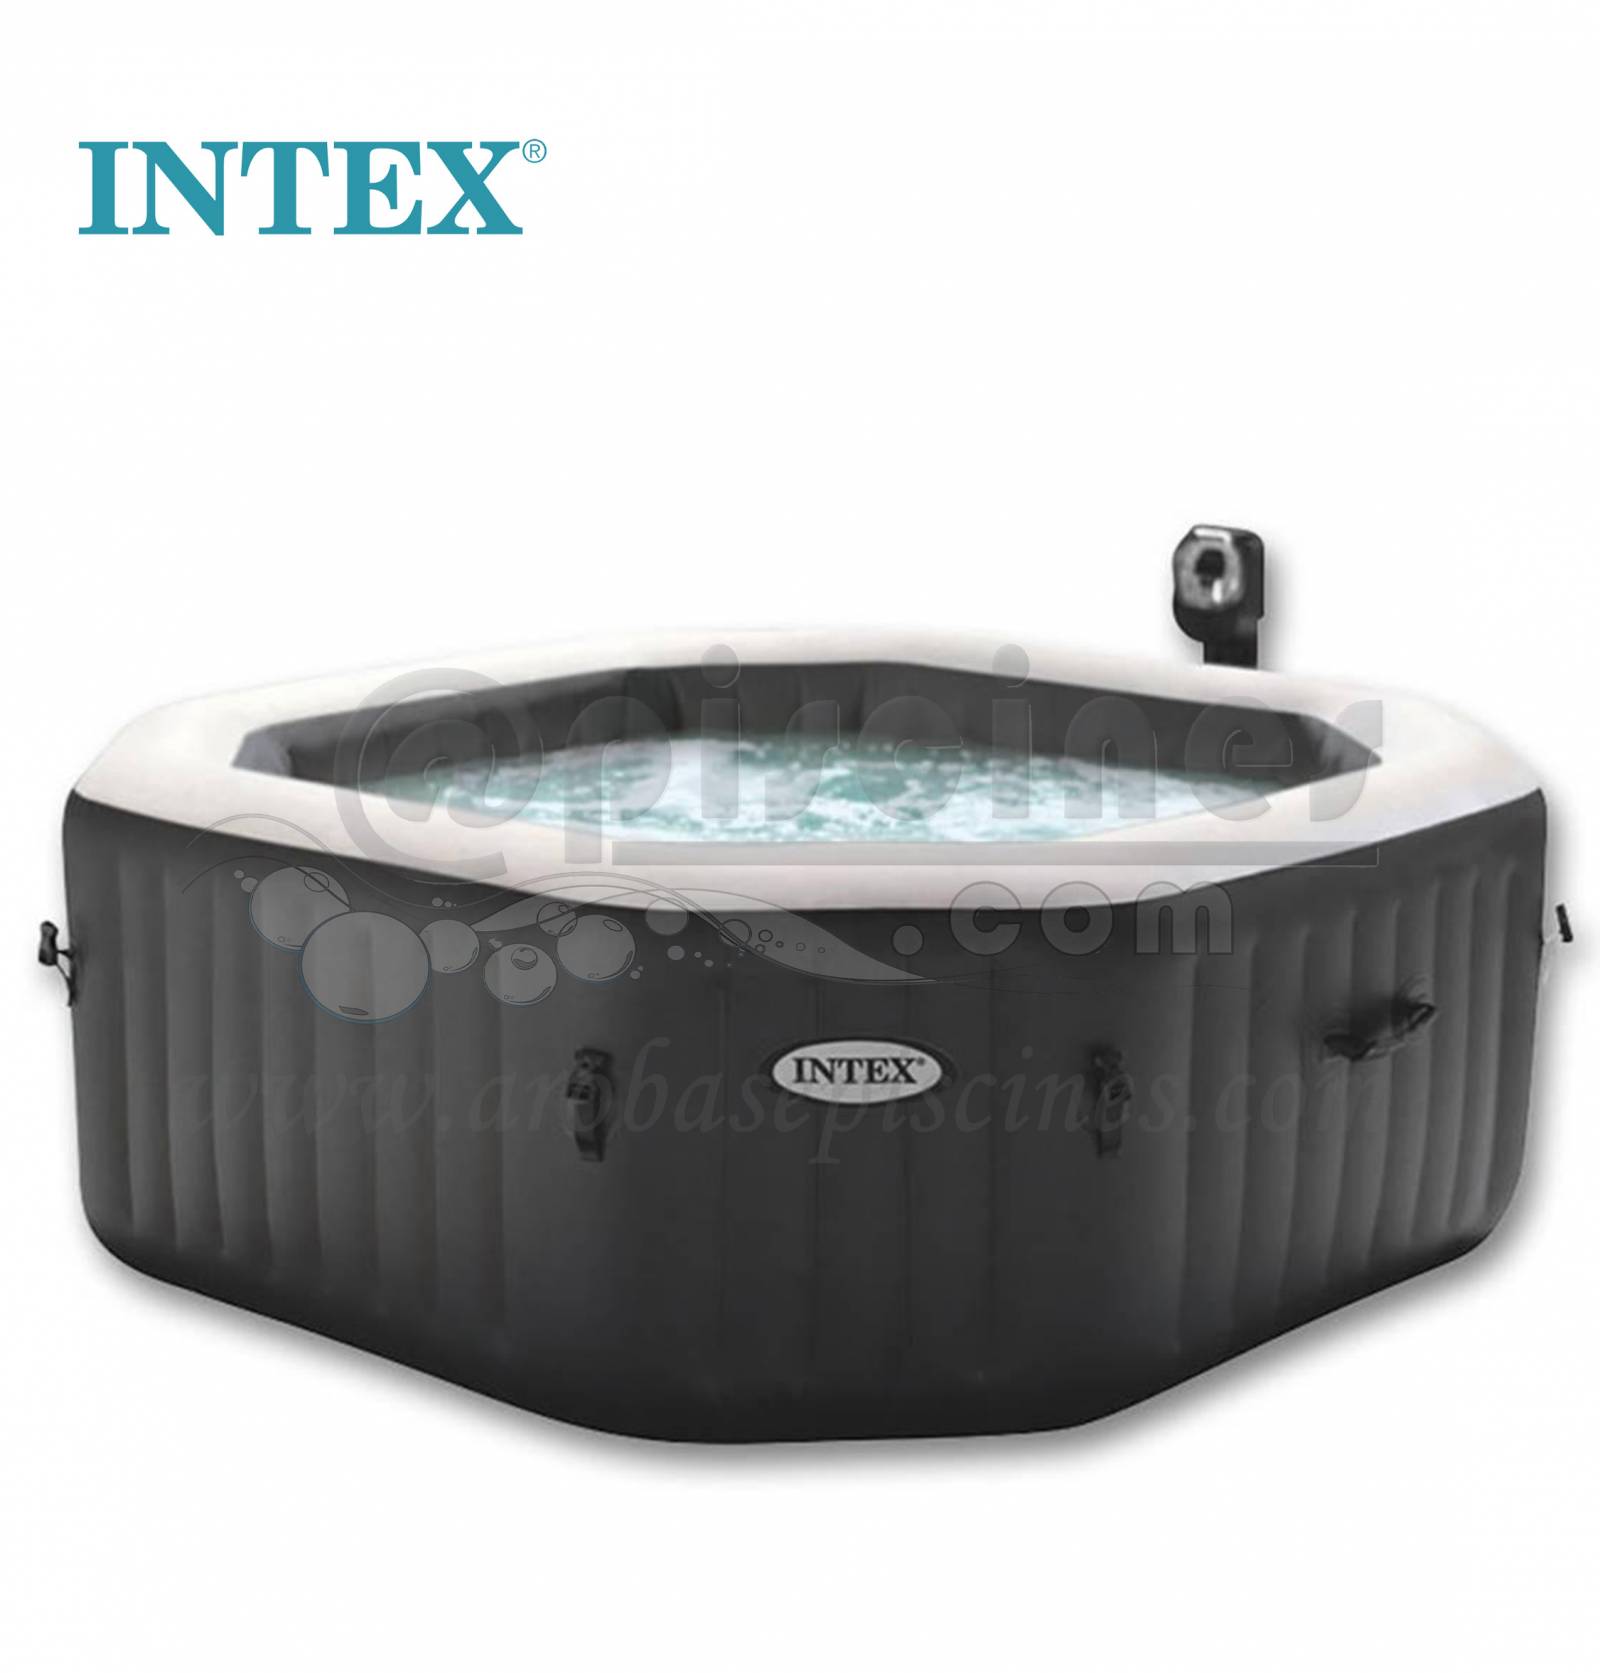 Spa gonflable Intex Carbone octogonal 6 places bulles + jets